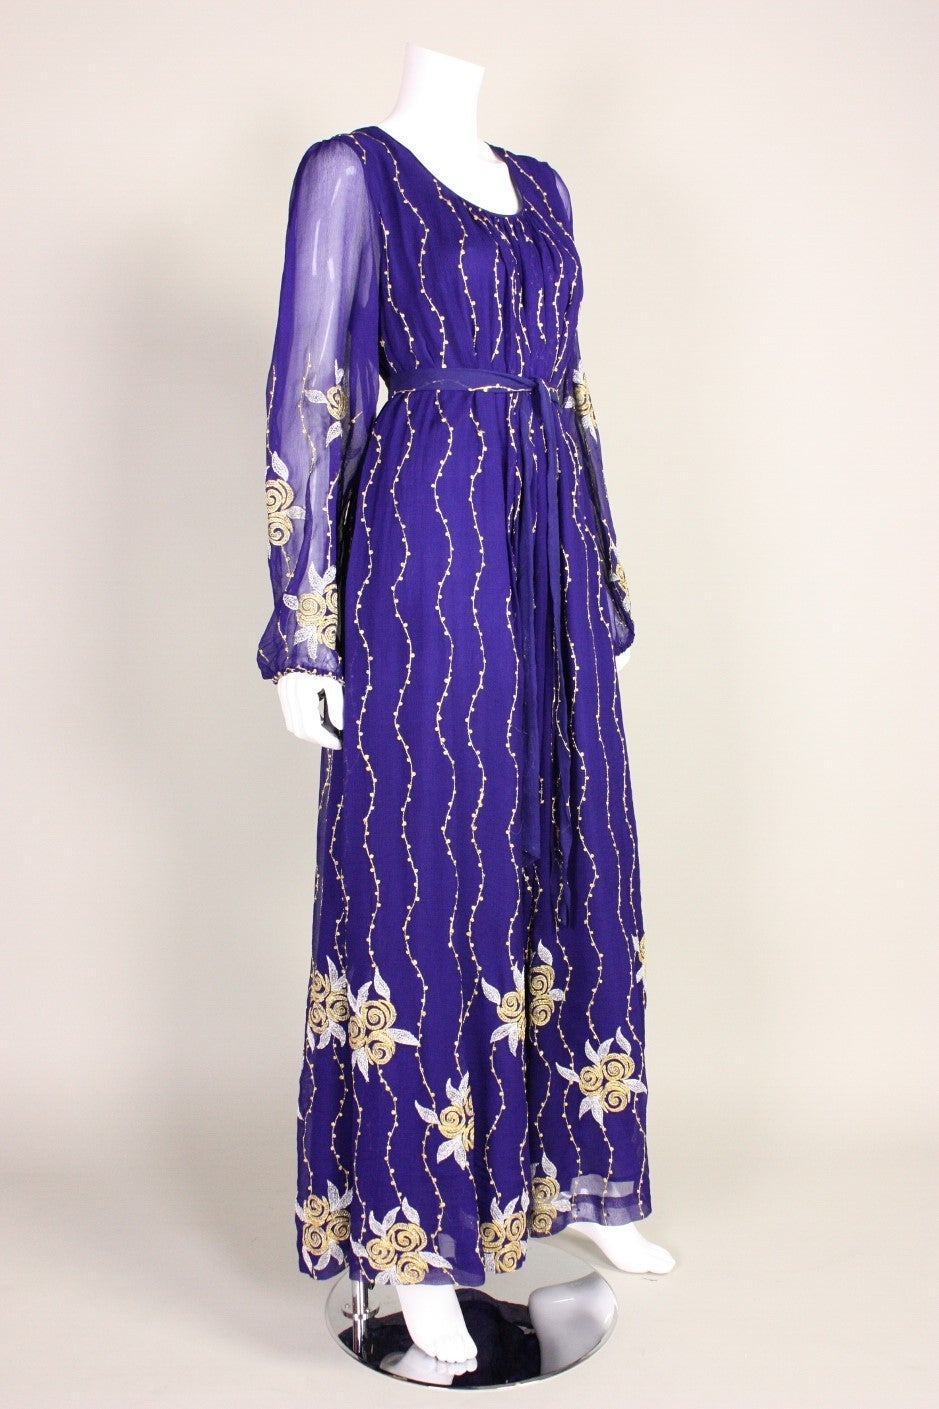 Vintage maxi dress from Raksha retailed at I. Magnin and dates to the 1970's.  It is made of purple silk chiffon with gold and white machine embroidery.  Scoop neckline.  Lined except for in sleeves.  Center back zipper closure.  Can be worn with or